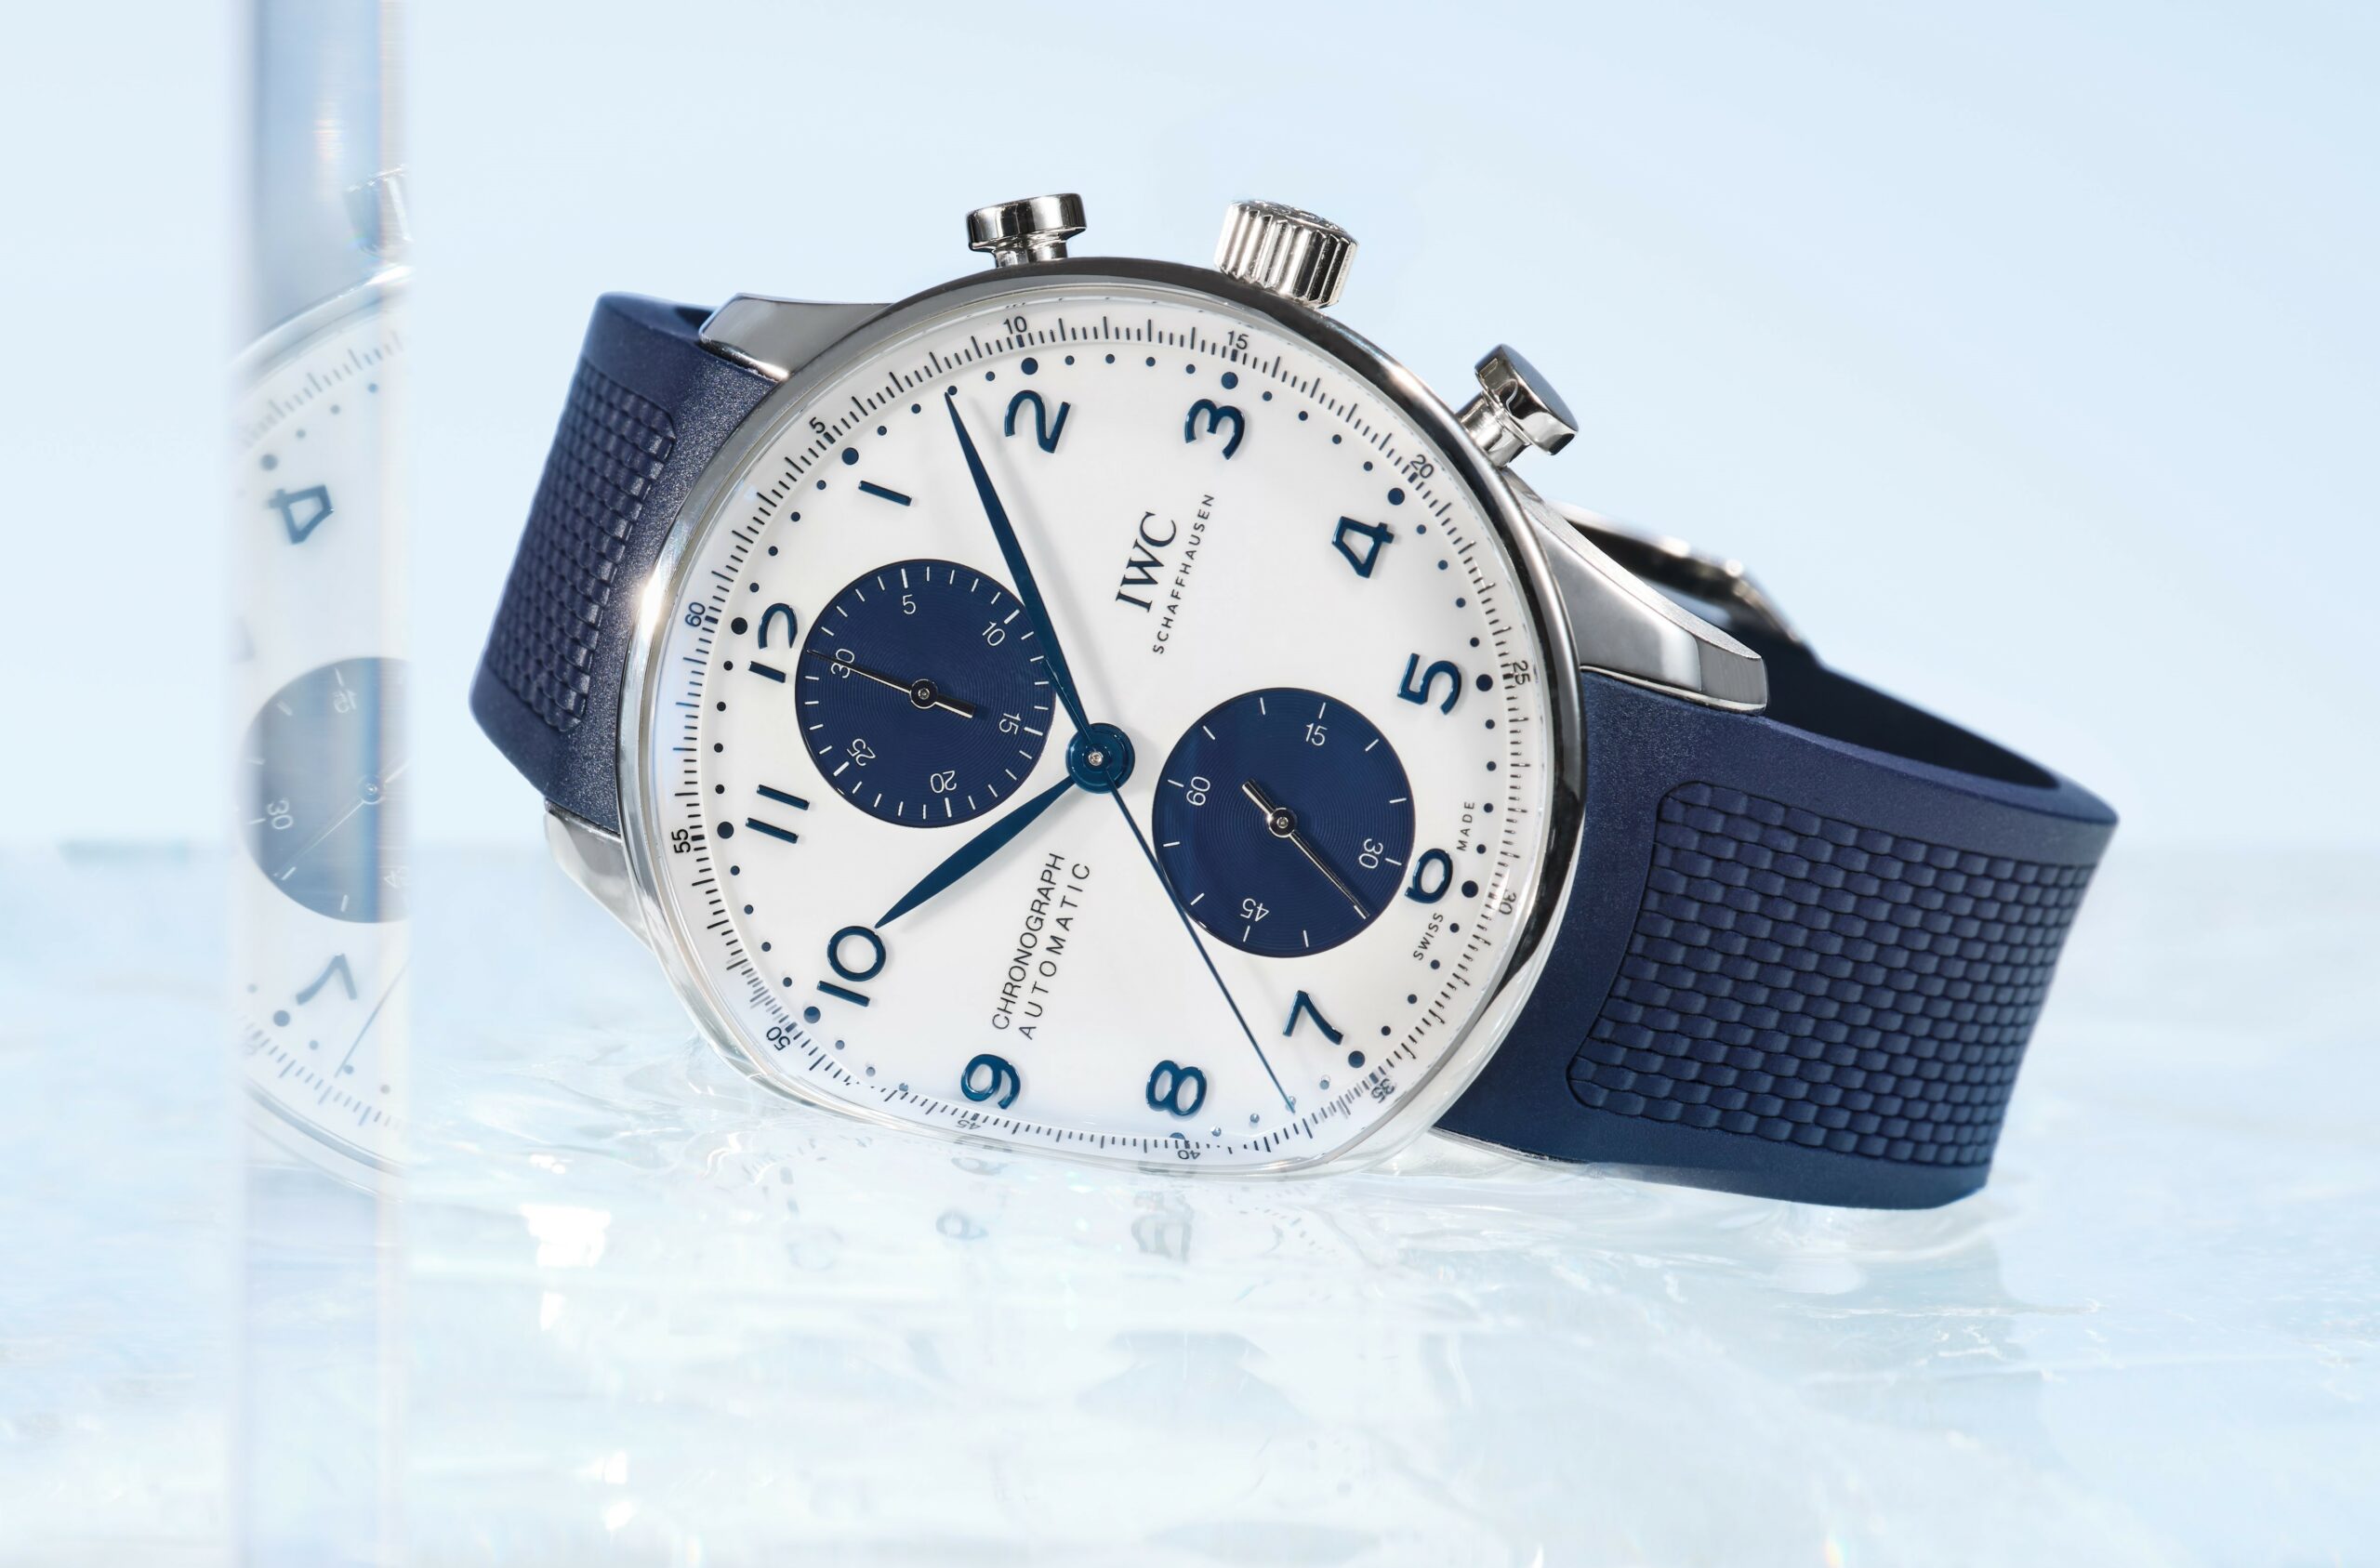 IWC Portugieser – New Launches!